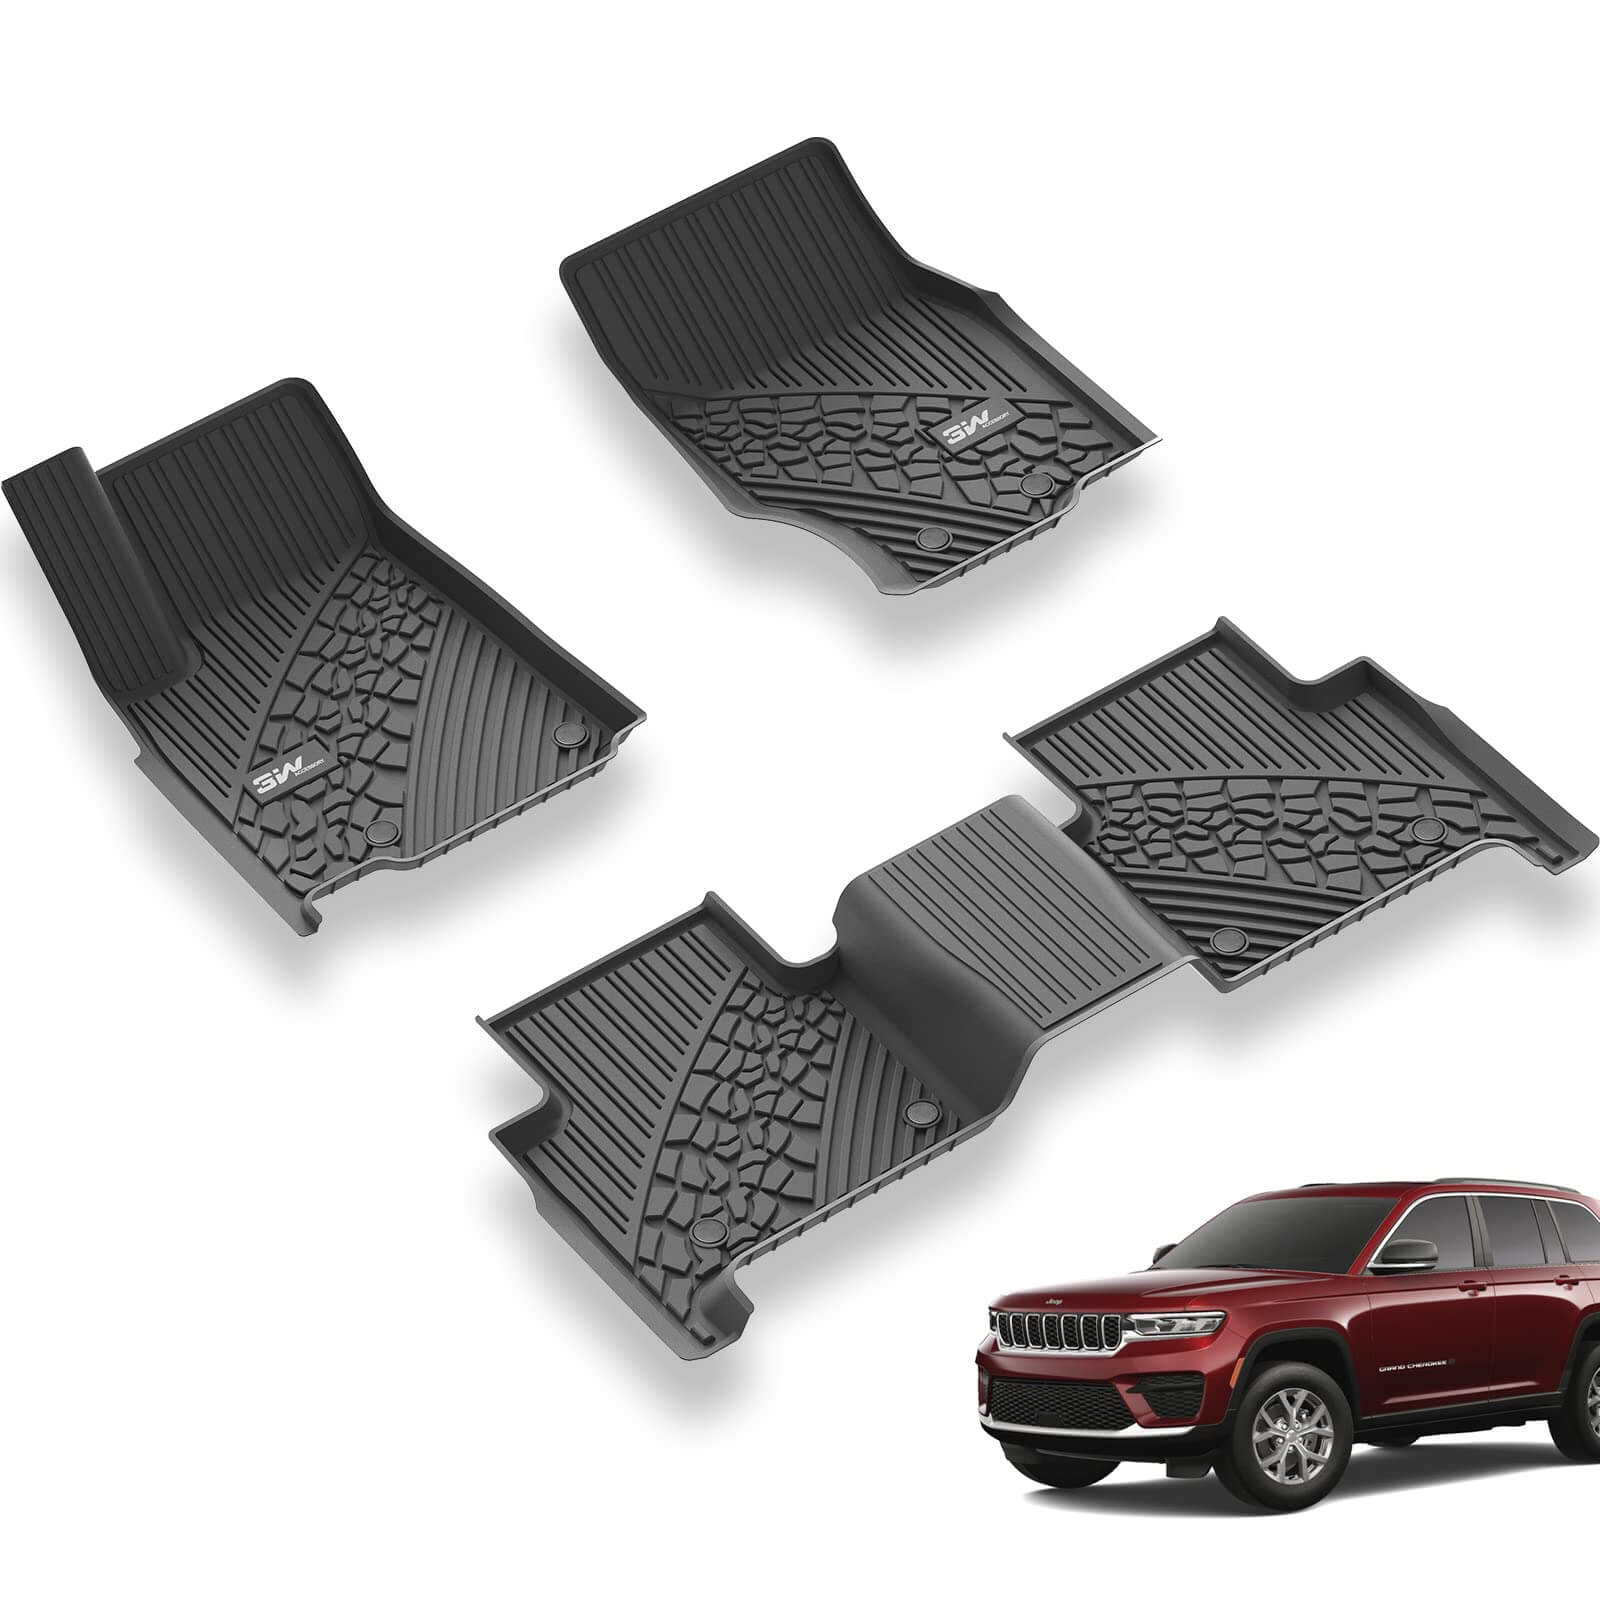 3W Jeep Grand Cherokee 2022-2024 (Non L or WK) Custom Floor Mats / Trunk Mat TPE Material & All-Weather Protection Vehicles & Parts 3Wliners 2022-2024 Grand Cherokee 2022-2024 1st&2nd Row Mats